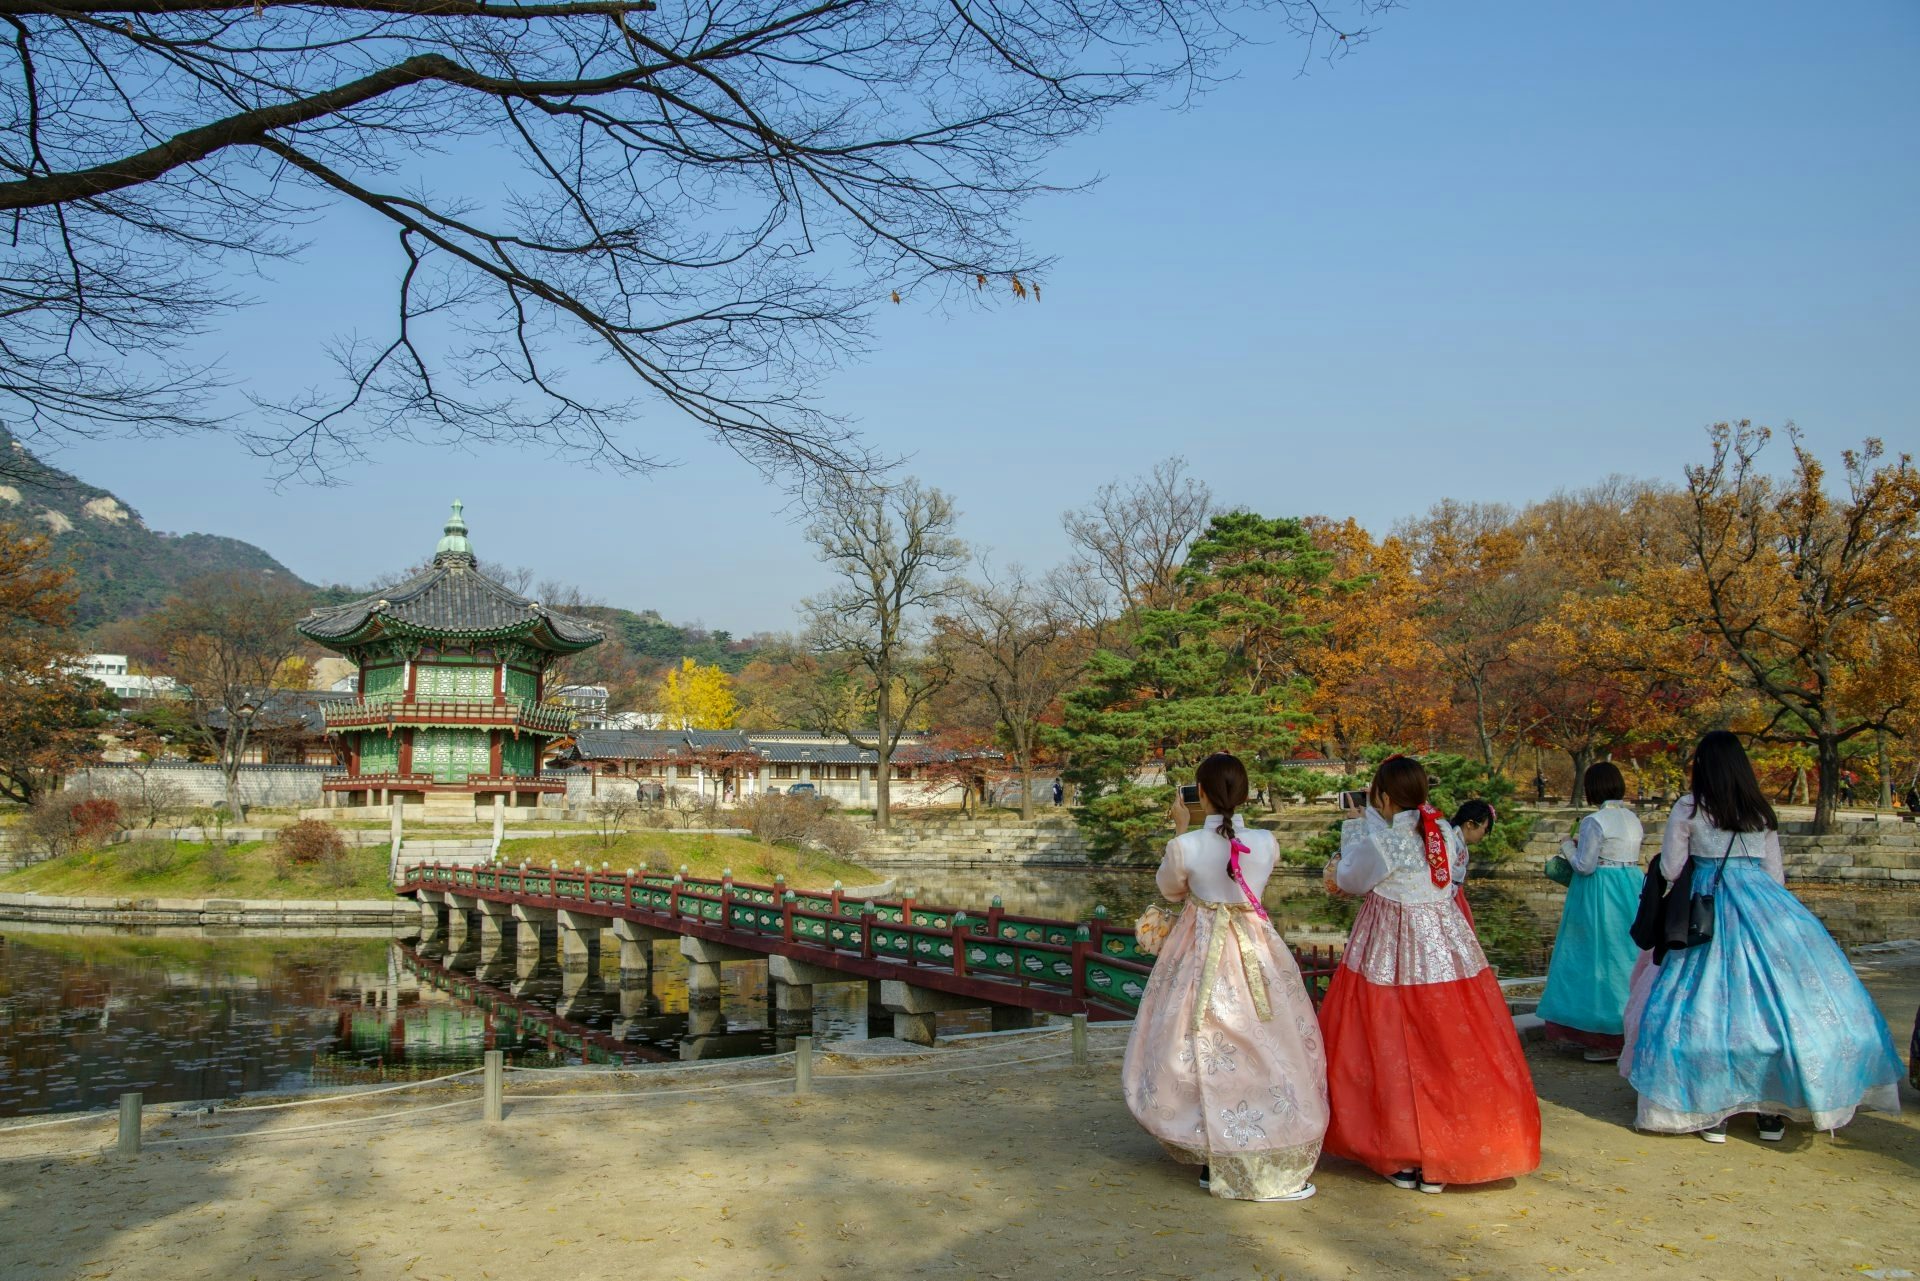 South Korea is immensely popular with Chinese tourists, now representing almost 50 percent of all tourist arrivals in the country. (Kim David/Shutterstock)